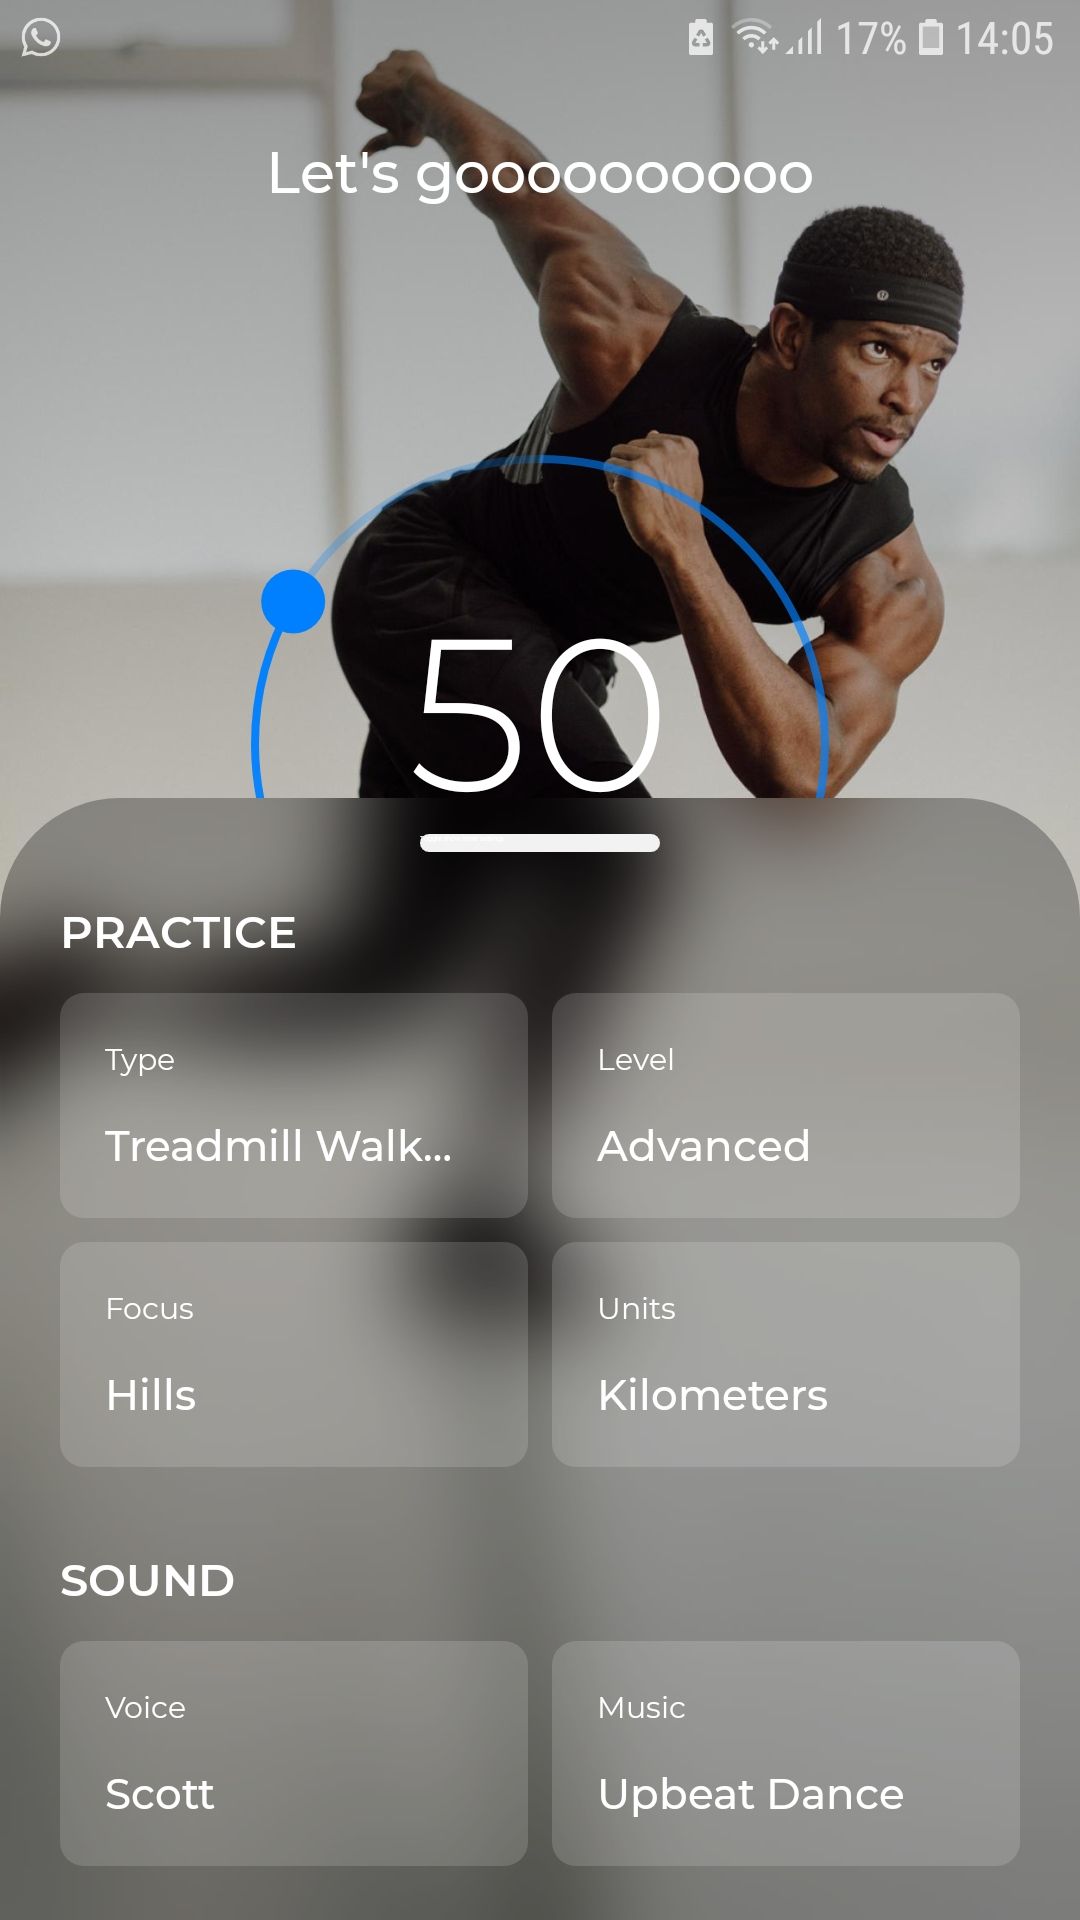 Down Dog Running practice mobile workout app